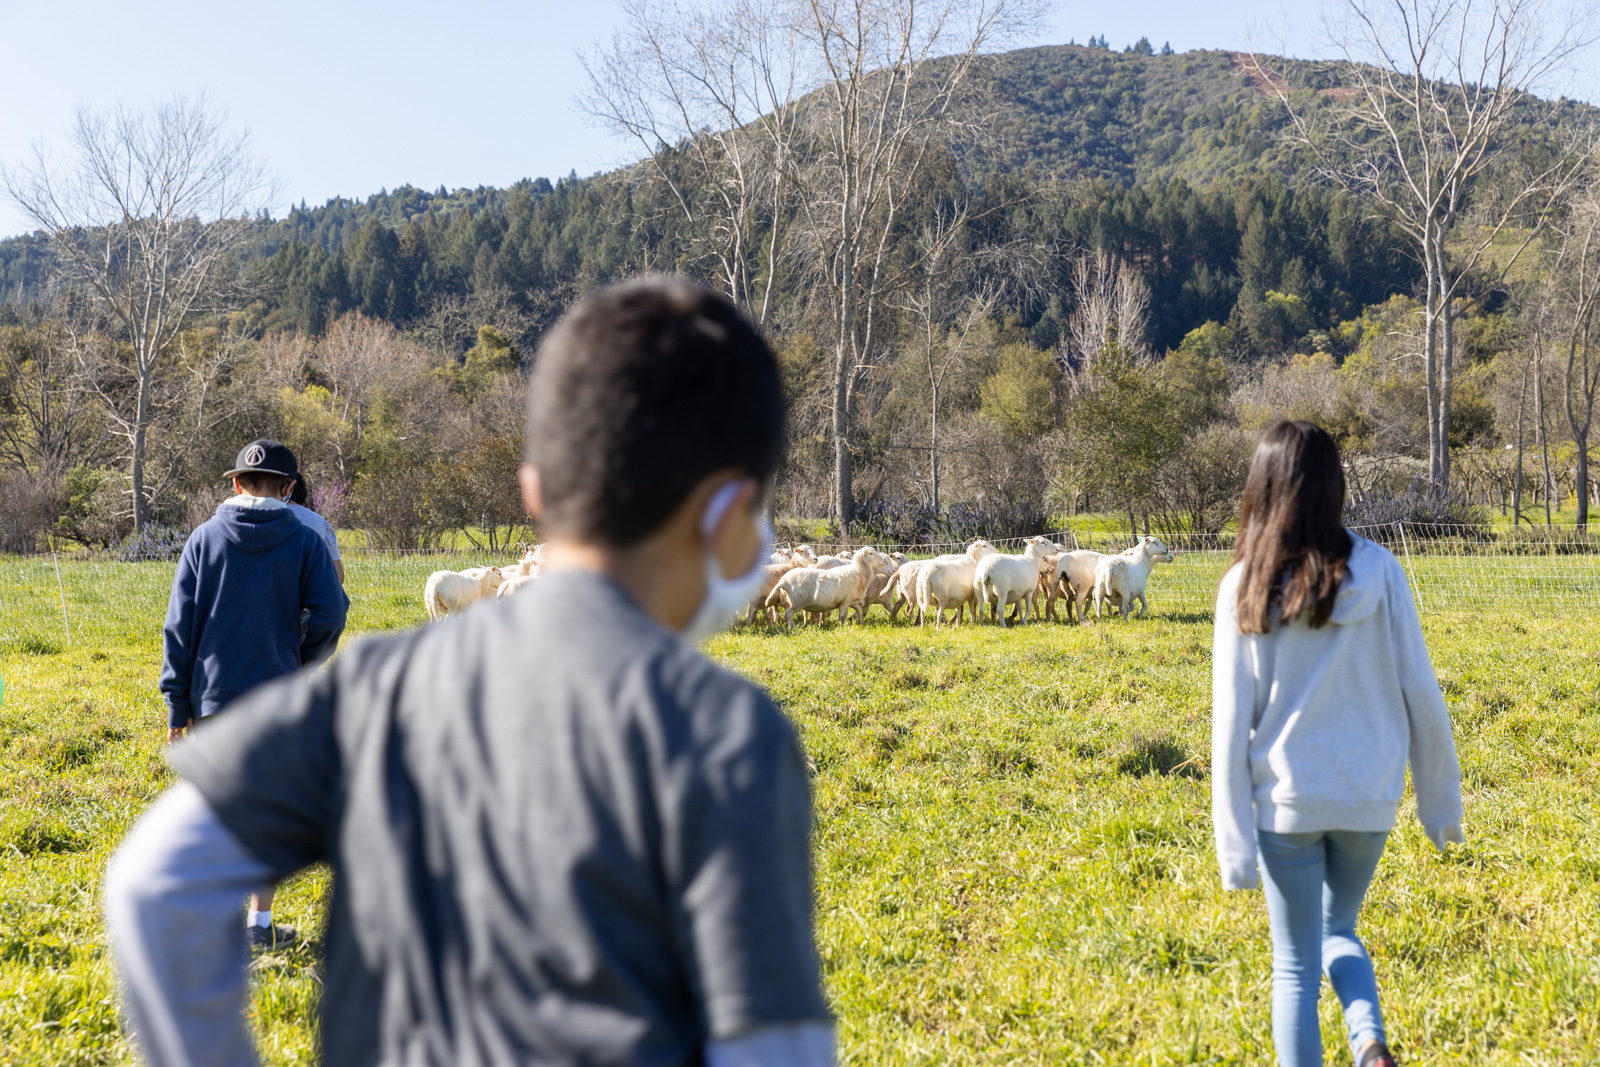 Kids on a farm admiring a herd of sheep from afar.